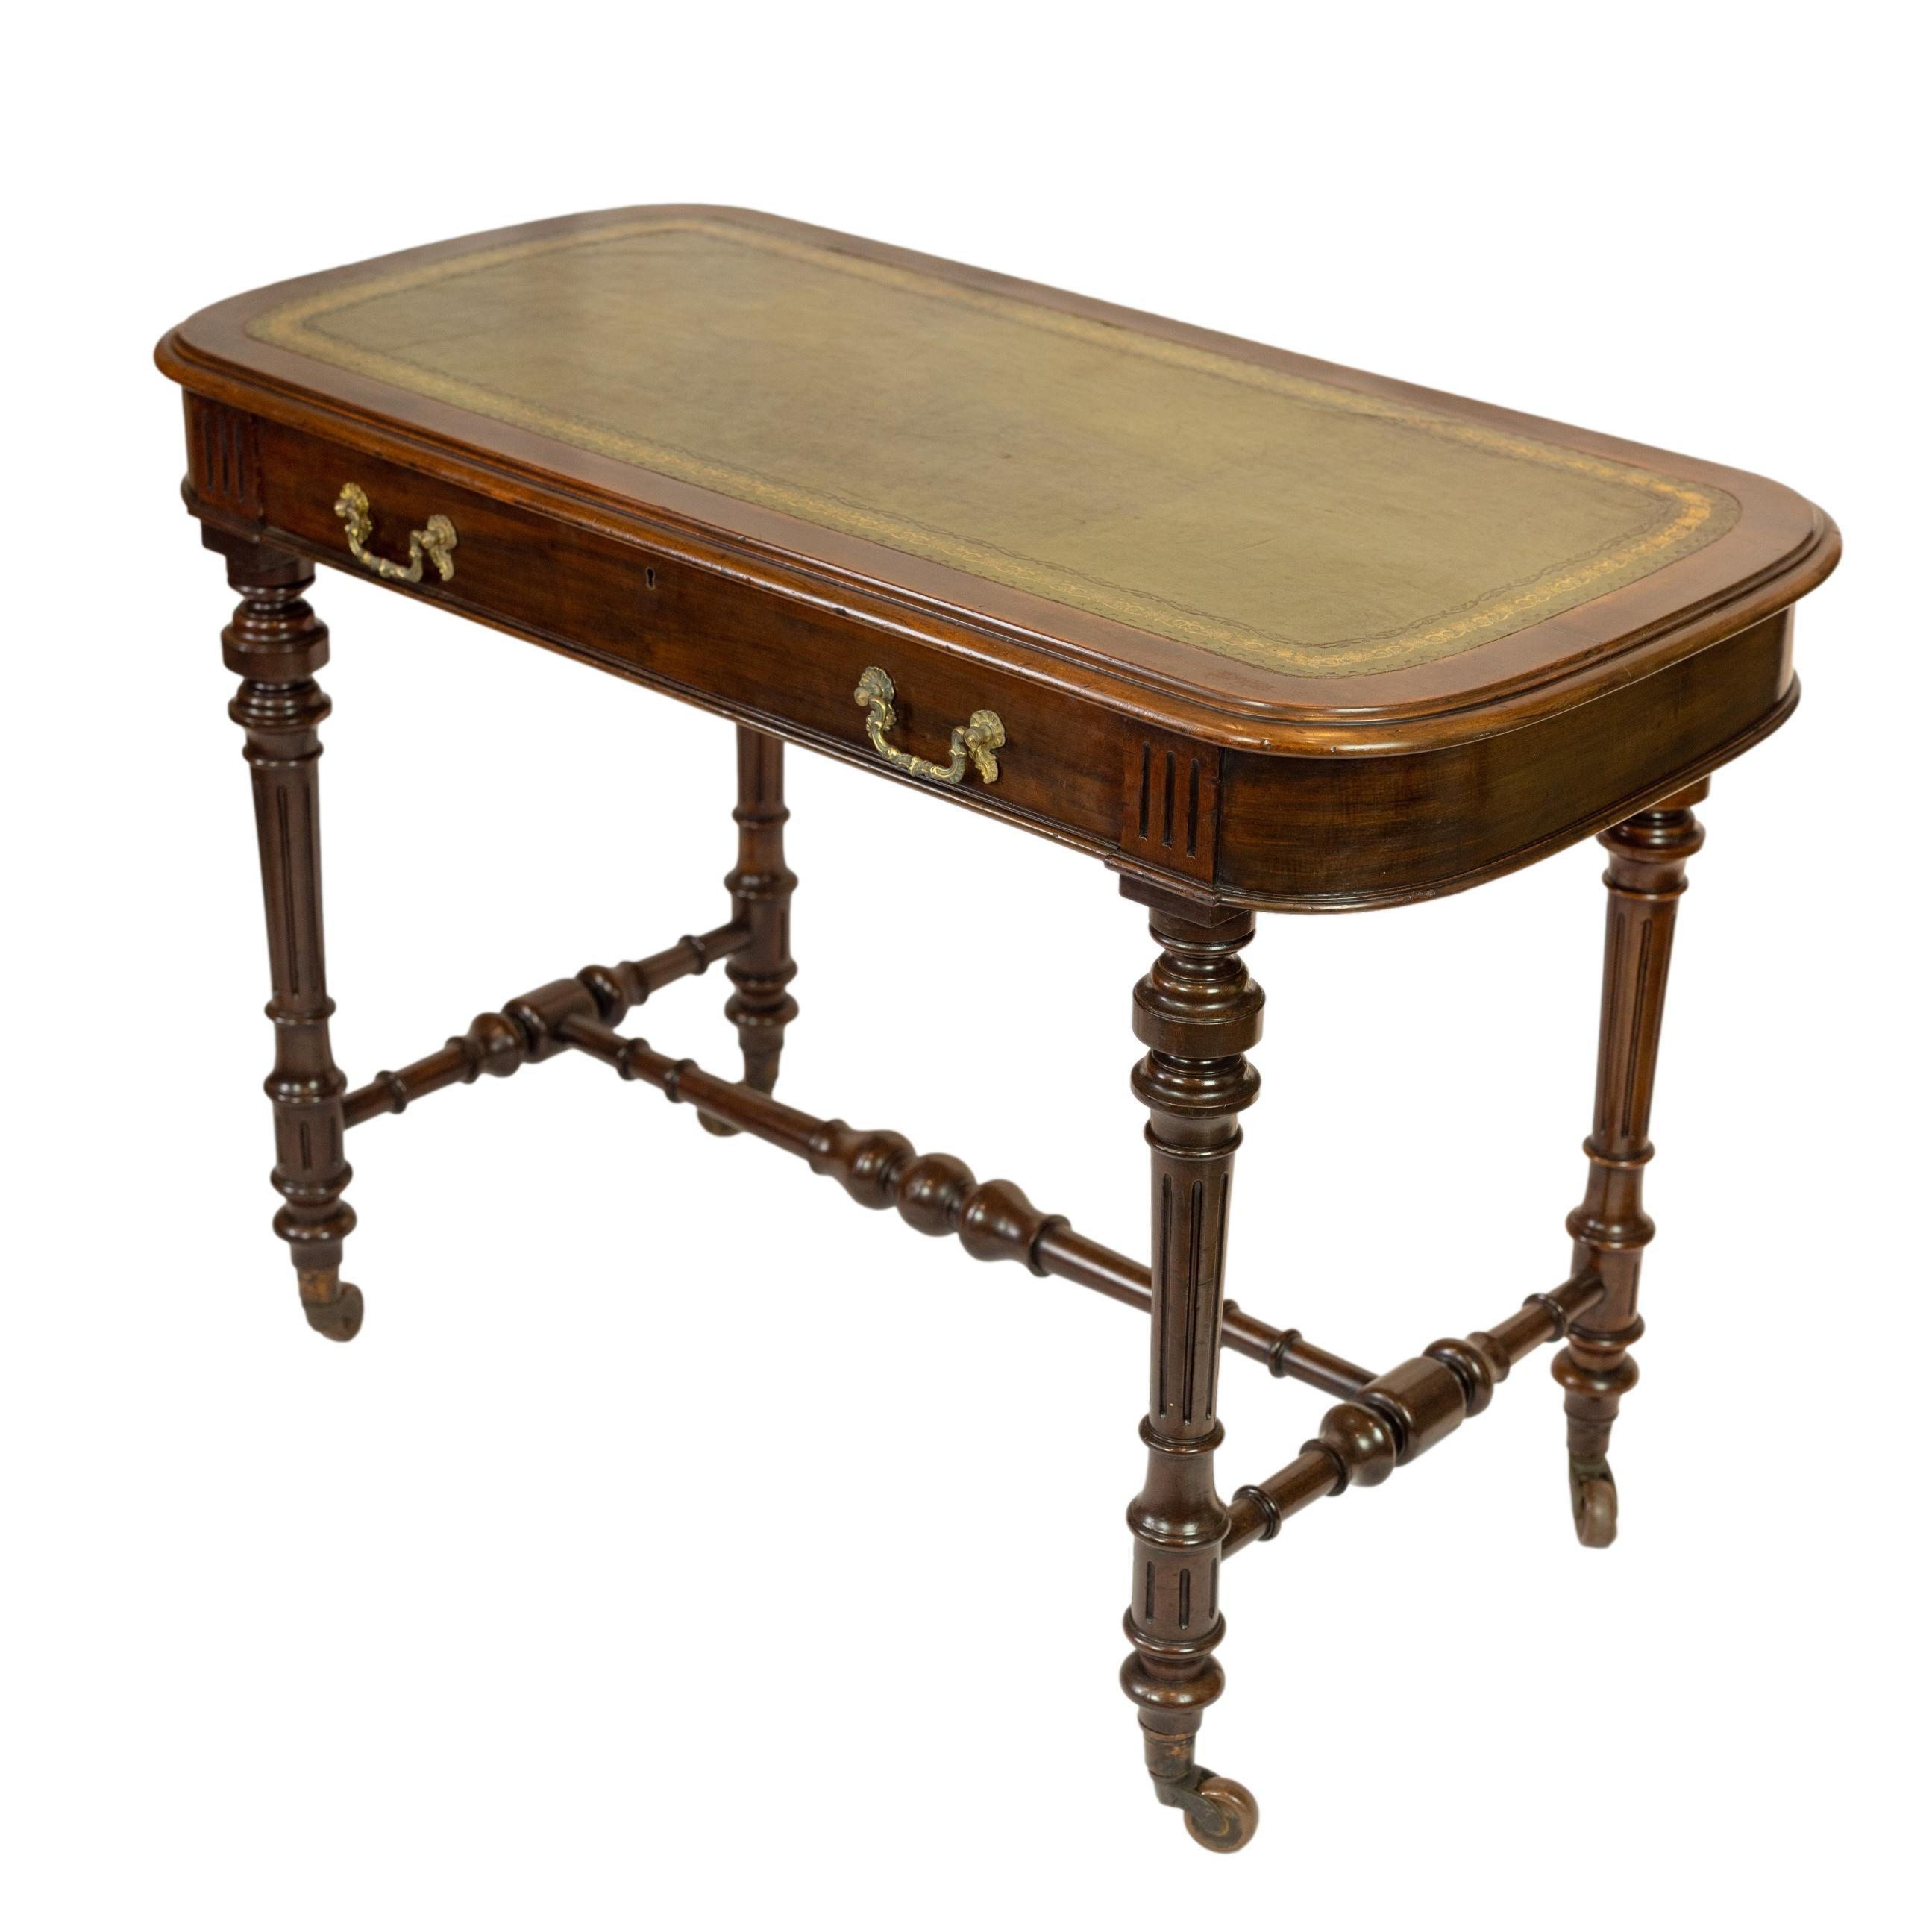 William IV Mahogany writing desk, of curved rectangular form, the writing surface with tooled and gilded green leather, above a single frieze drawer with original gilded bronze pulls, on turned, reeded legs and conforming stretcher, on brass